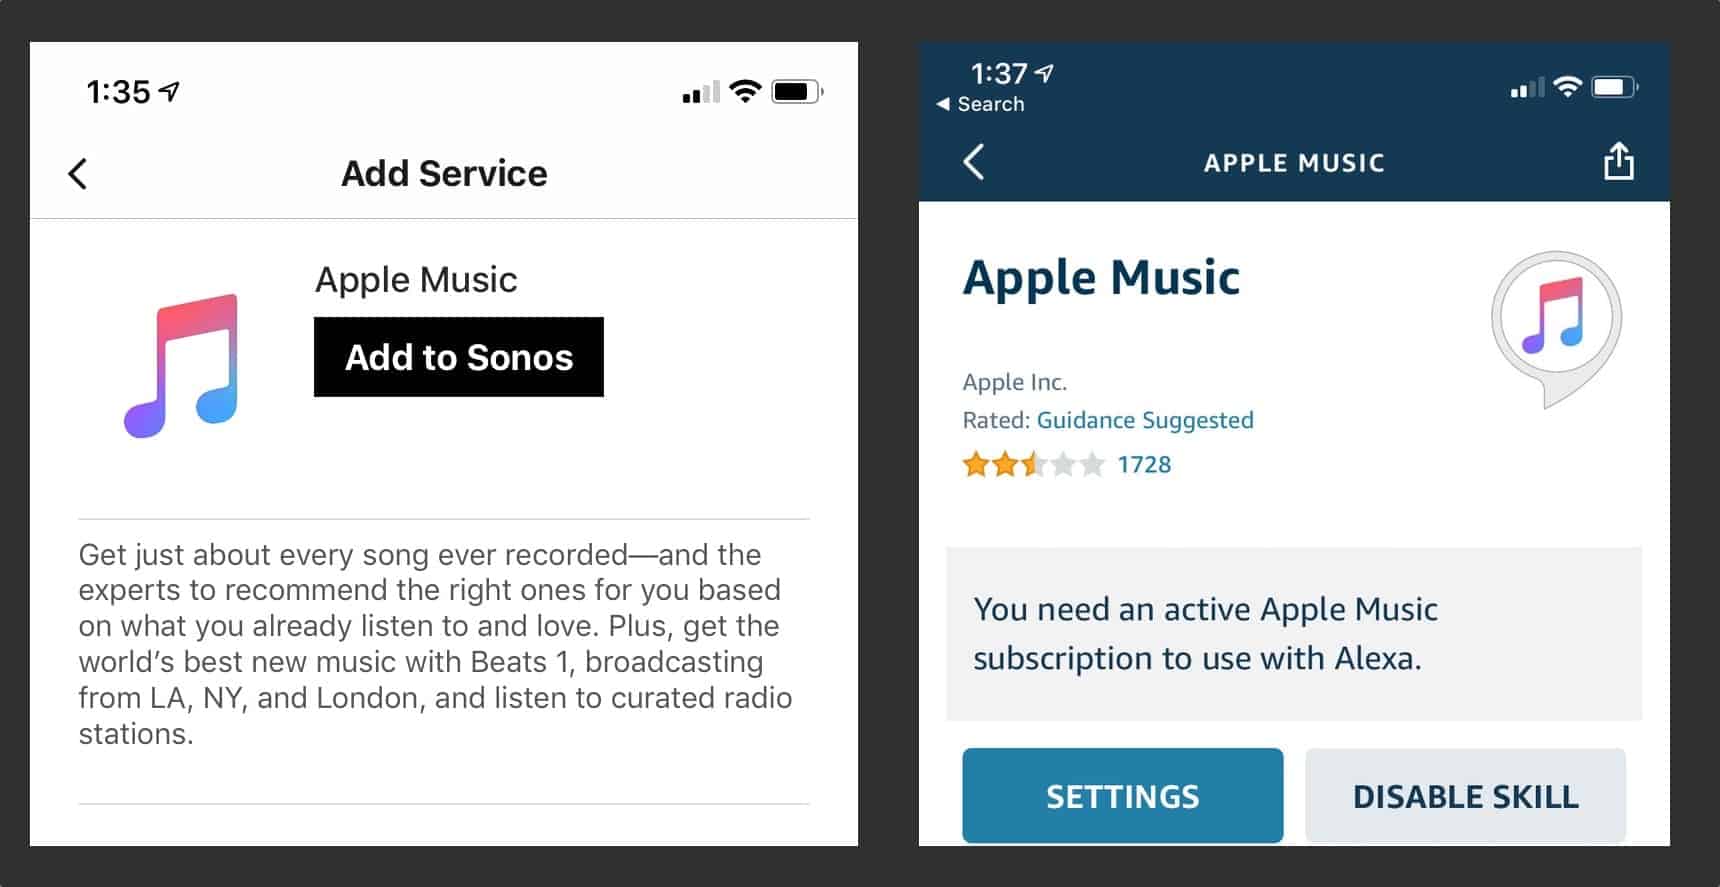 How To Use Alexa To Control Apple Music On Sonos The Mac Observer